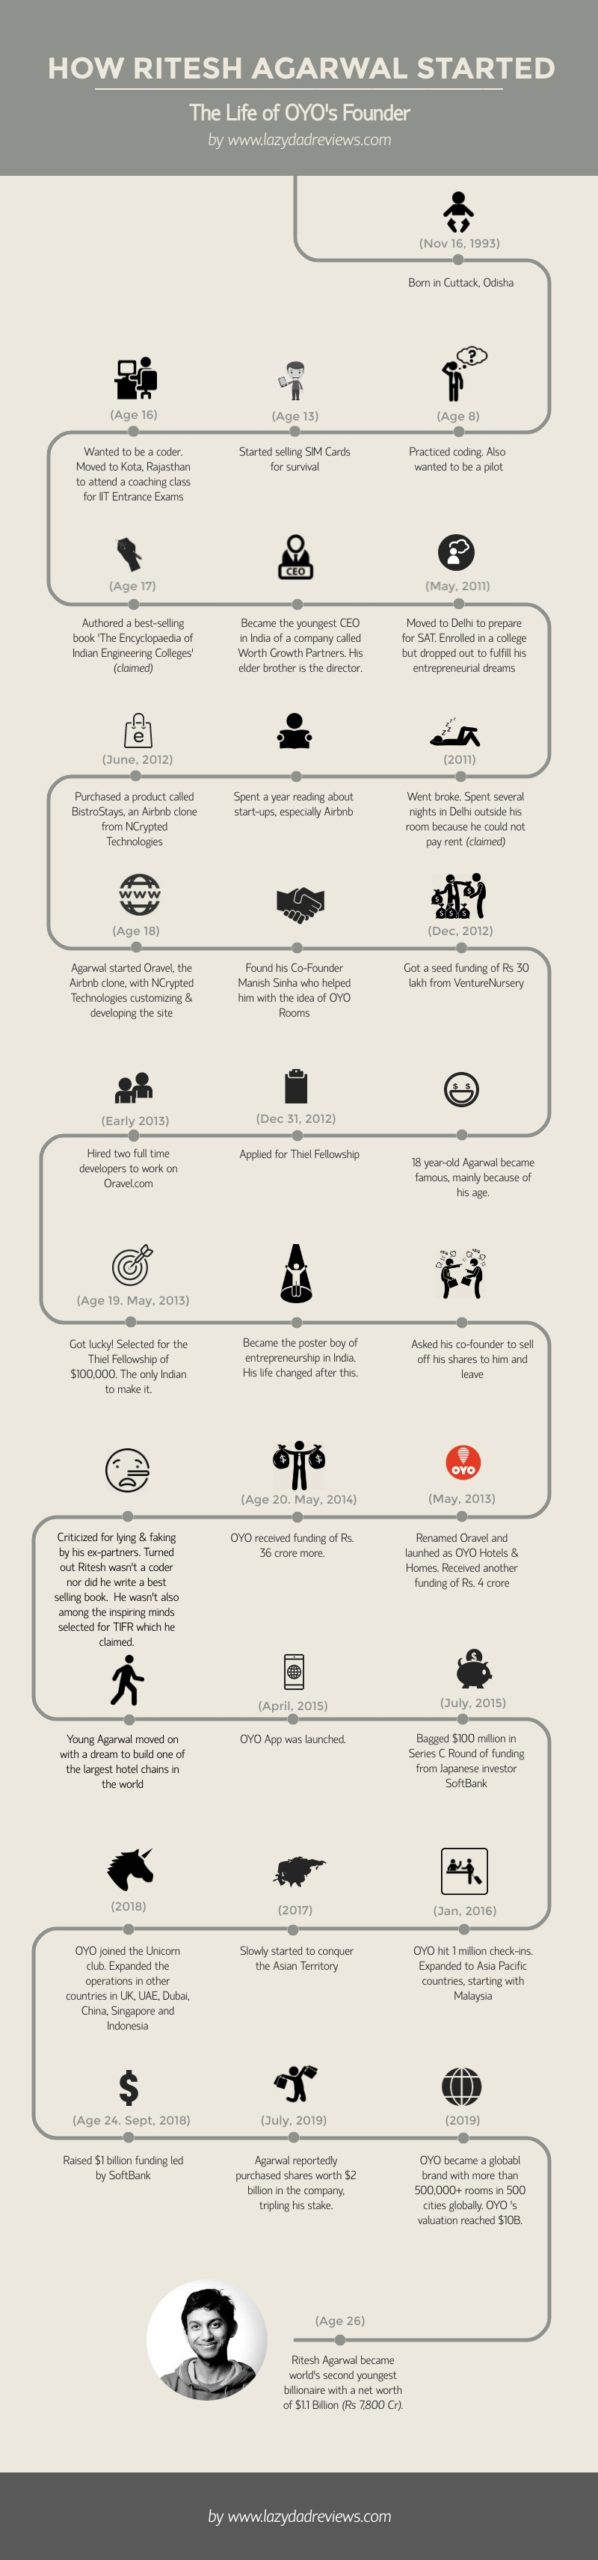 Infographic : How The Second Youngest Billionaire In The World Started